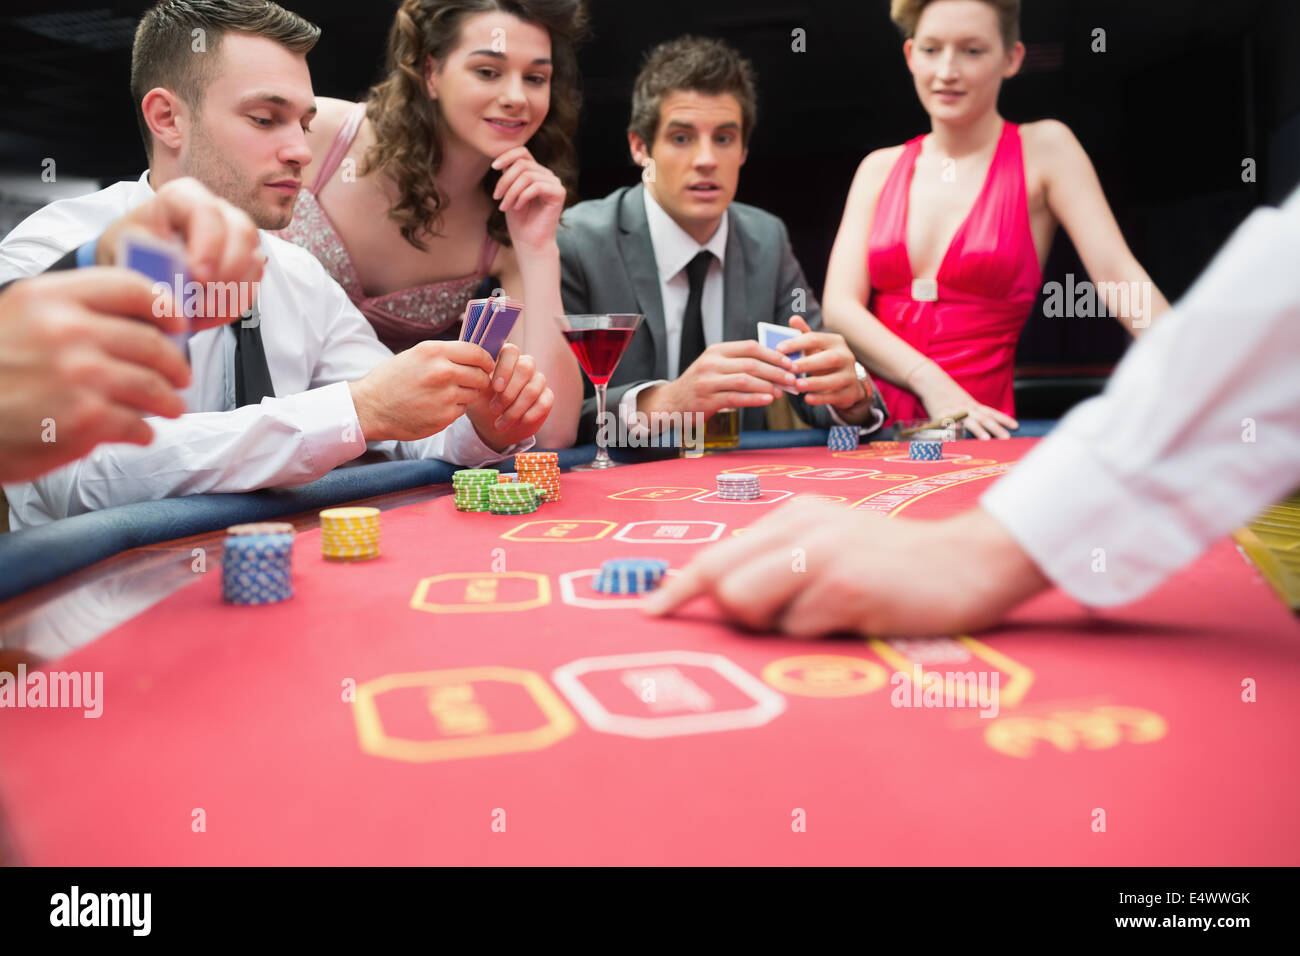 People playing exciting game of poker Stock Photo